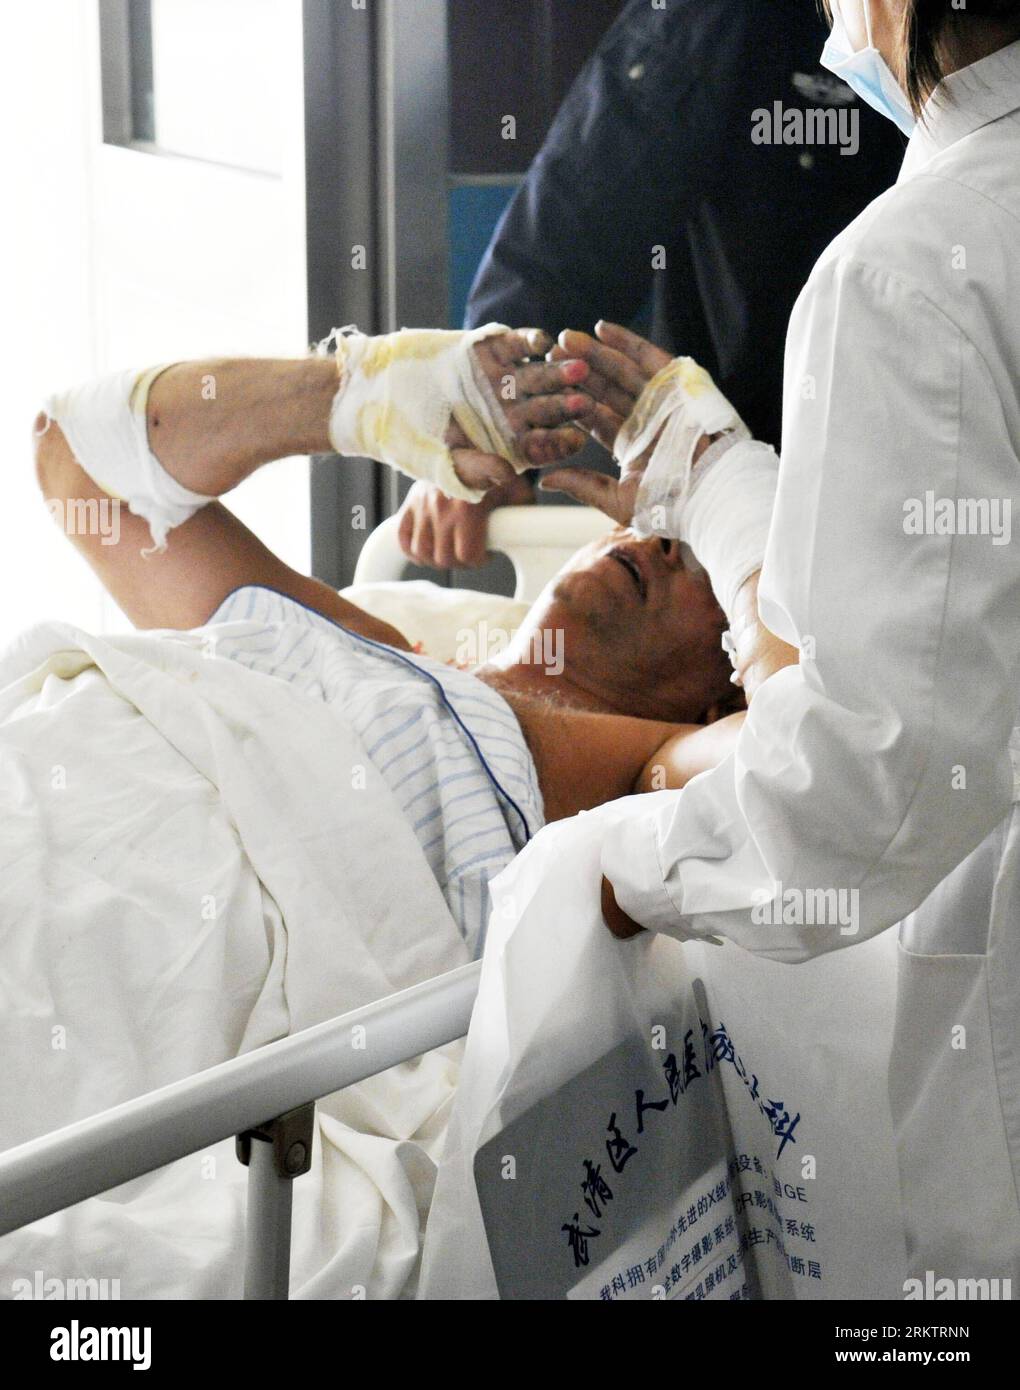 Bildnummer: 58540109  Datum: 01.10.2012  Copyright: imago/Xinhua (121001) -- TIANJIN, Oct. 1, 2012 (Xinhua) -- An injured German national receives medical treatment at the People s Hospital in Tianjin s Wuqing District after a road accident which claimed 6 lives on a pivotal expressway linking Beijing with Shanghai near Beijing, capital of China, Oct. 1, 2012. Six people, including five German nationals and a Chinese, were killed and 14 others, 12 were German, injured after a tourist bus rear-ended a container truck and caught fire on Monday morning on the expressway. None of the injured is li Stock Photo